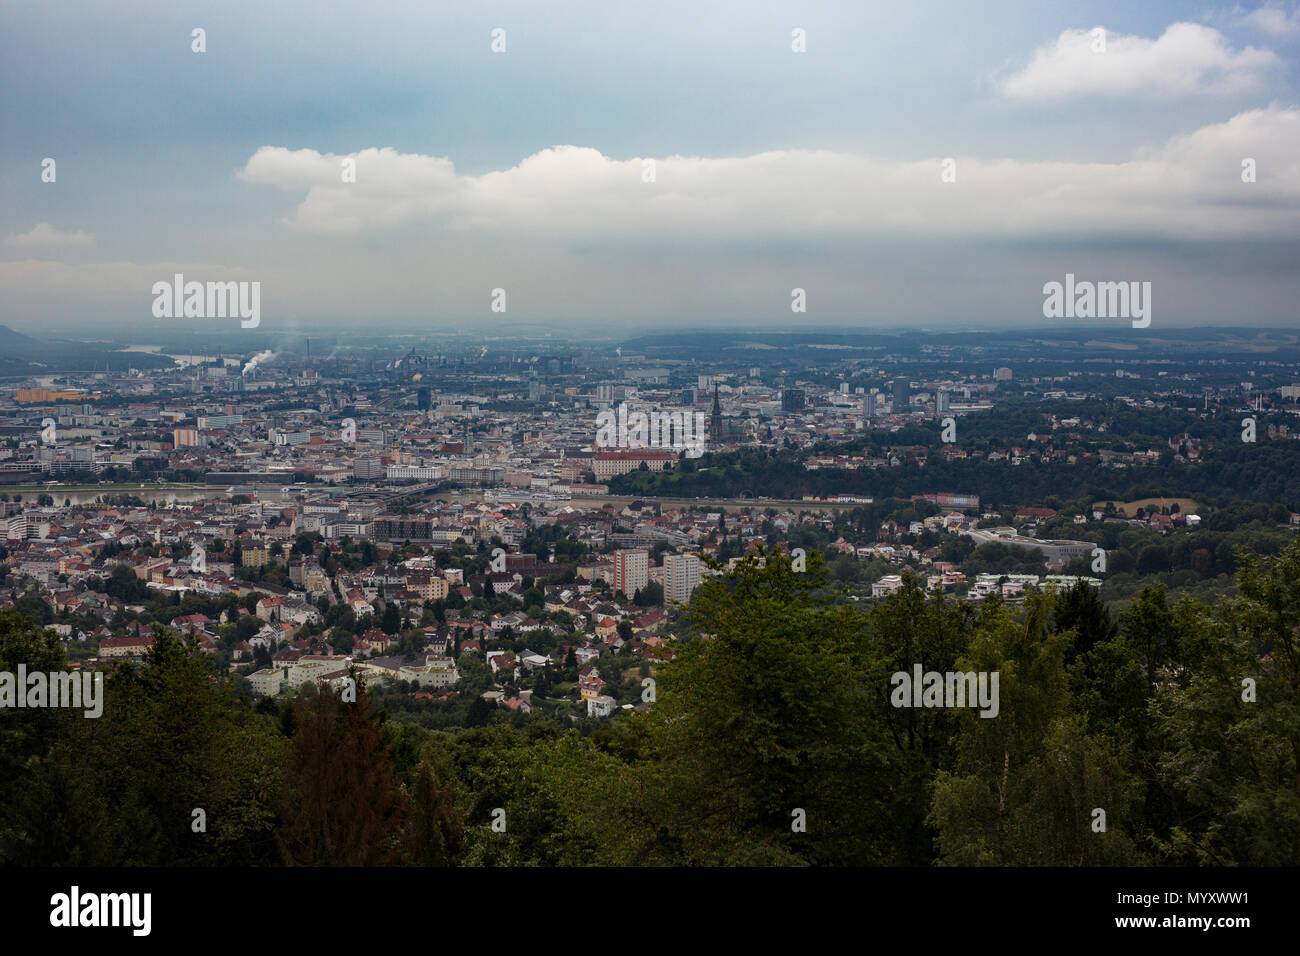 The view of the city of Linz, Austria, from the overlook point at Pöstlingberg. Stock Photo